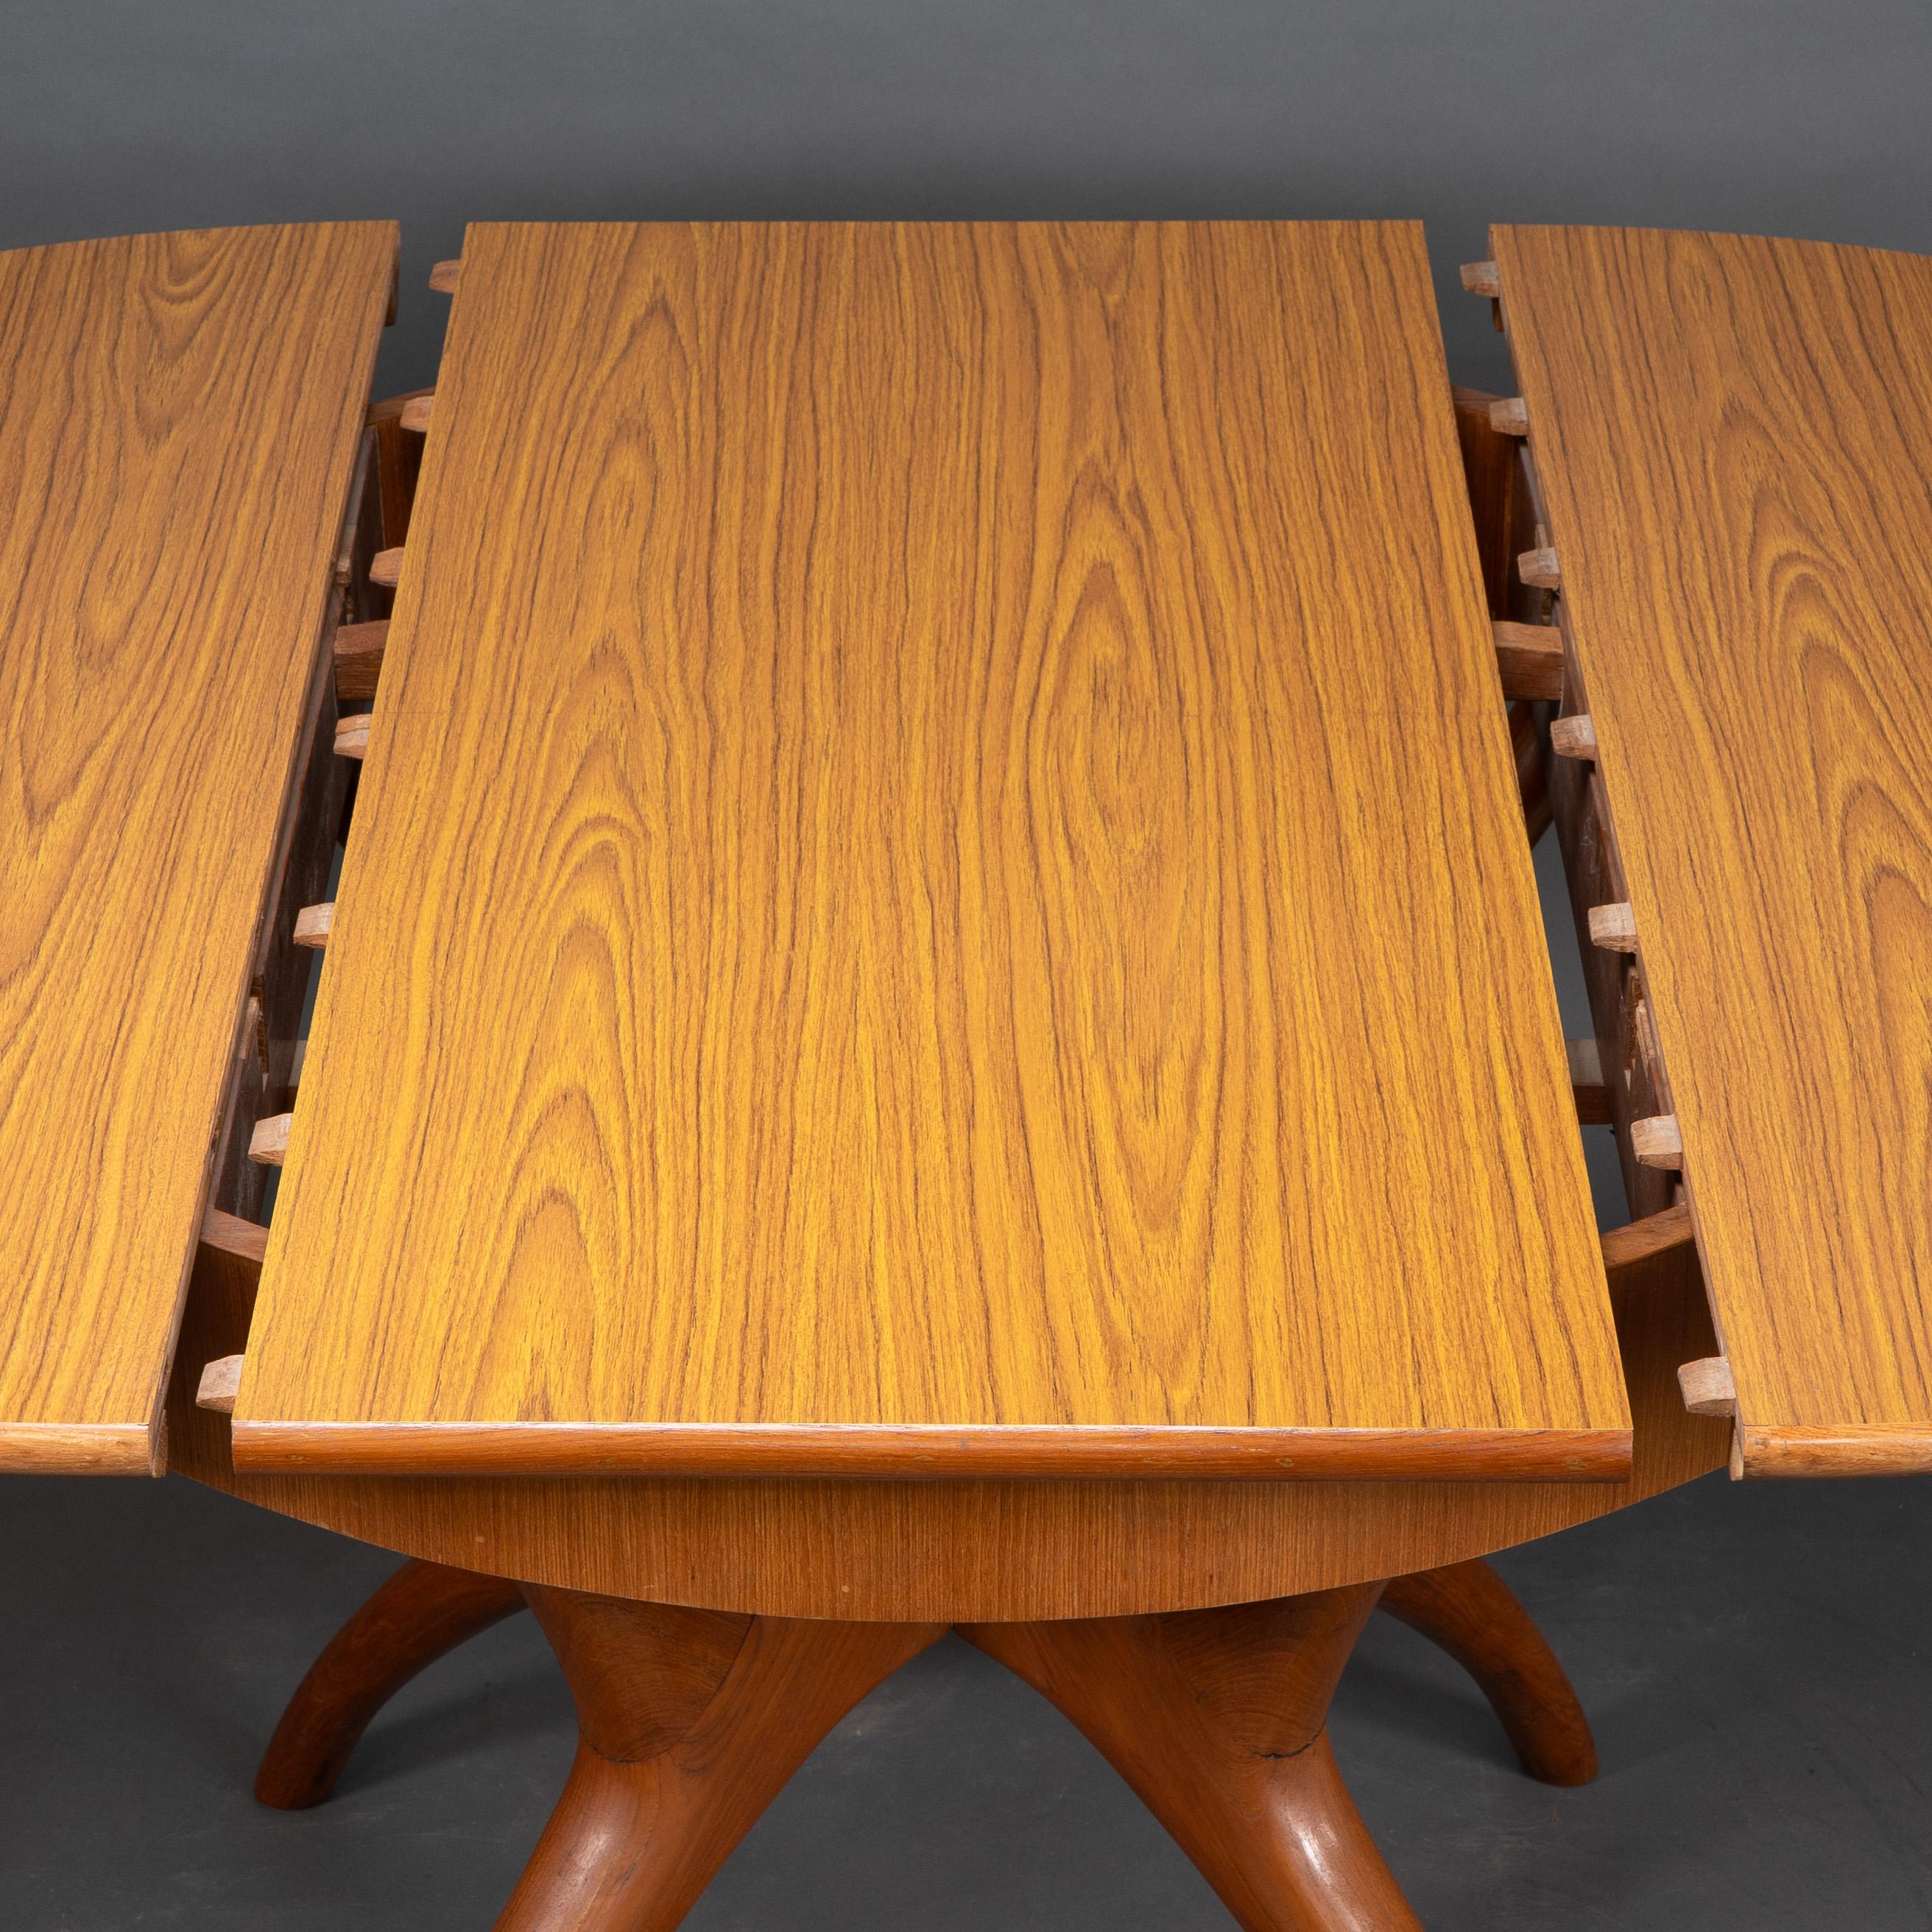 Midcentury Teak Extending Dining Table with Organic Style Cross Frame Legs For Sale 2